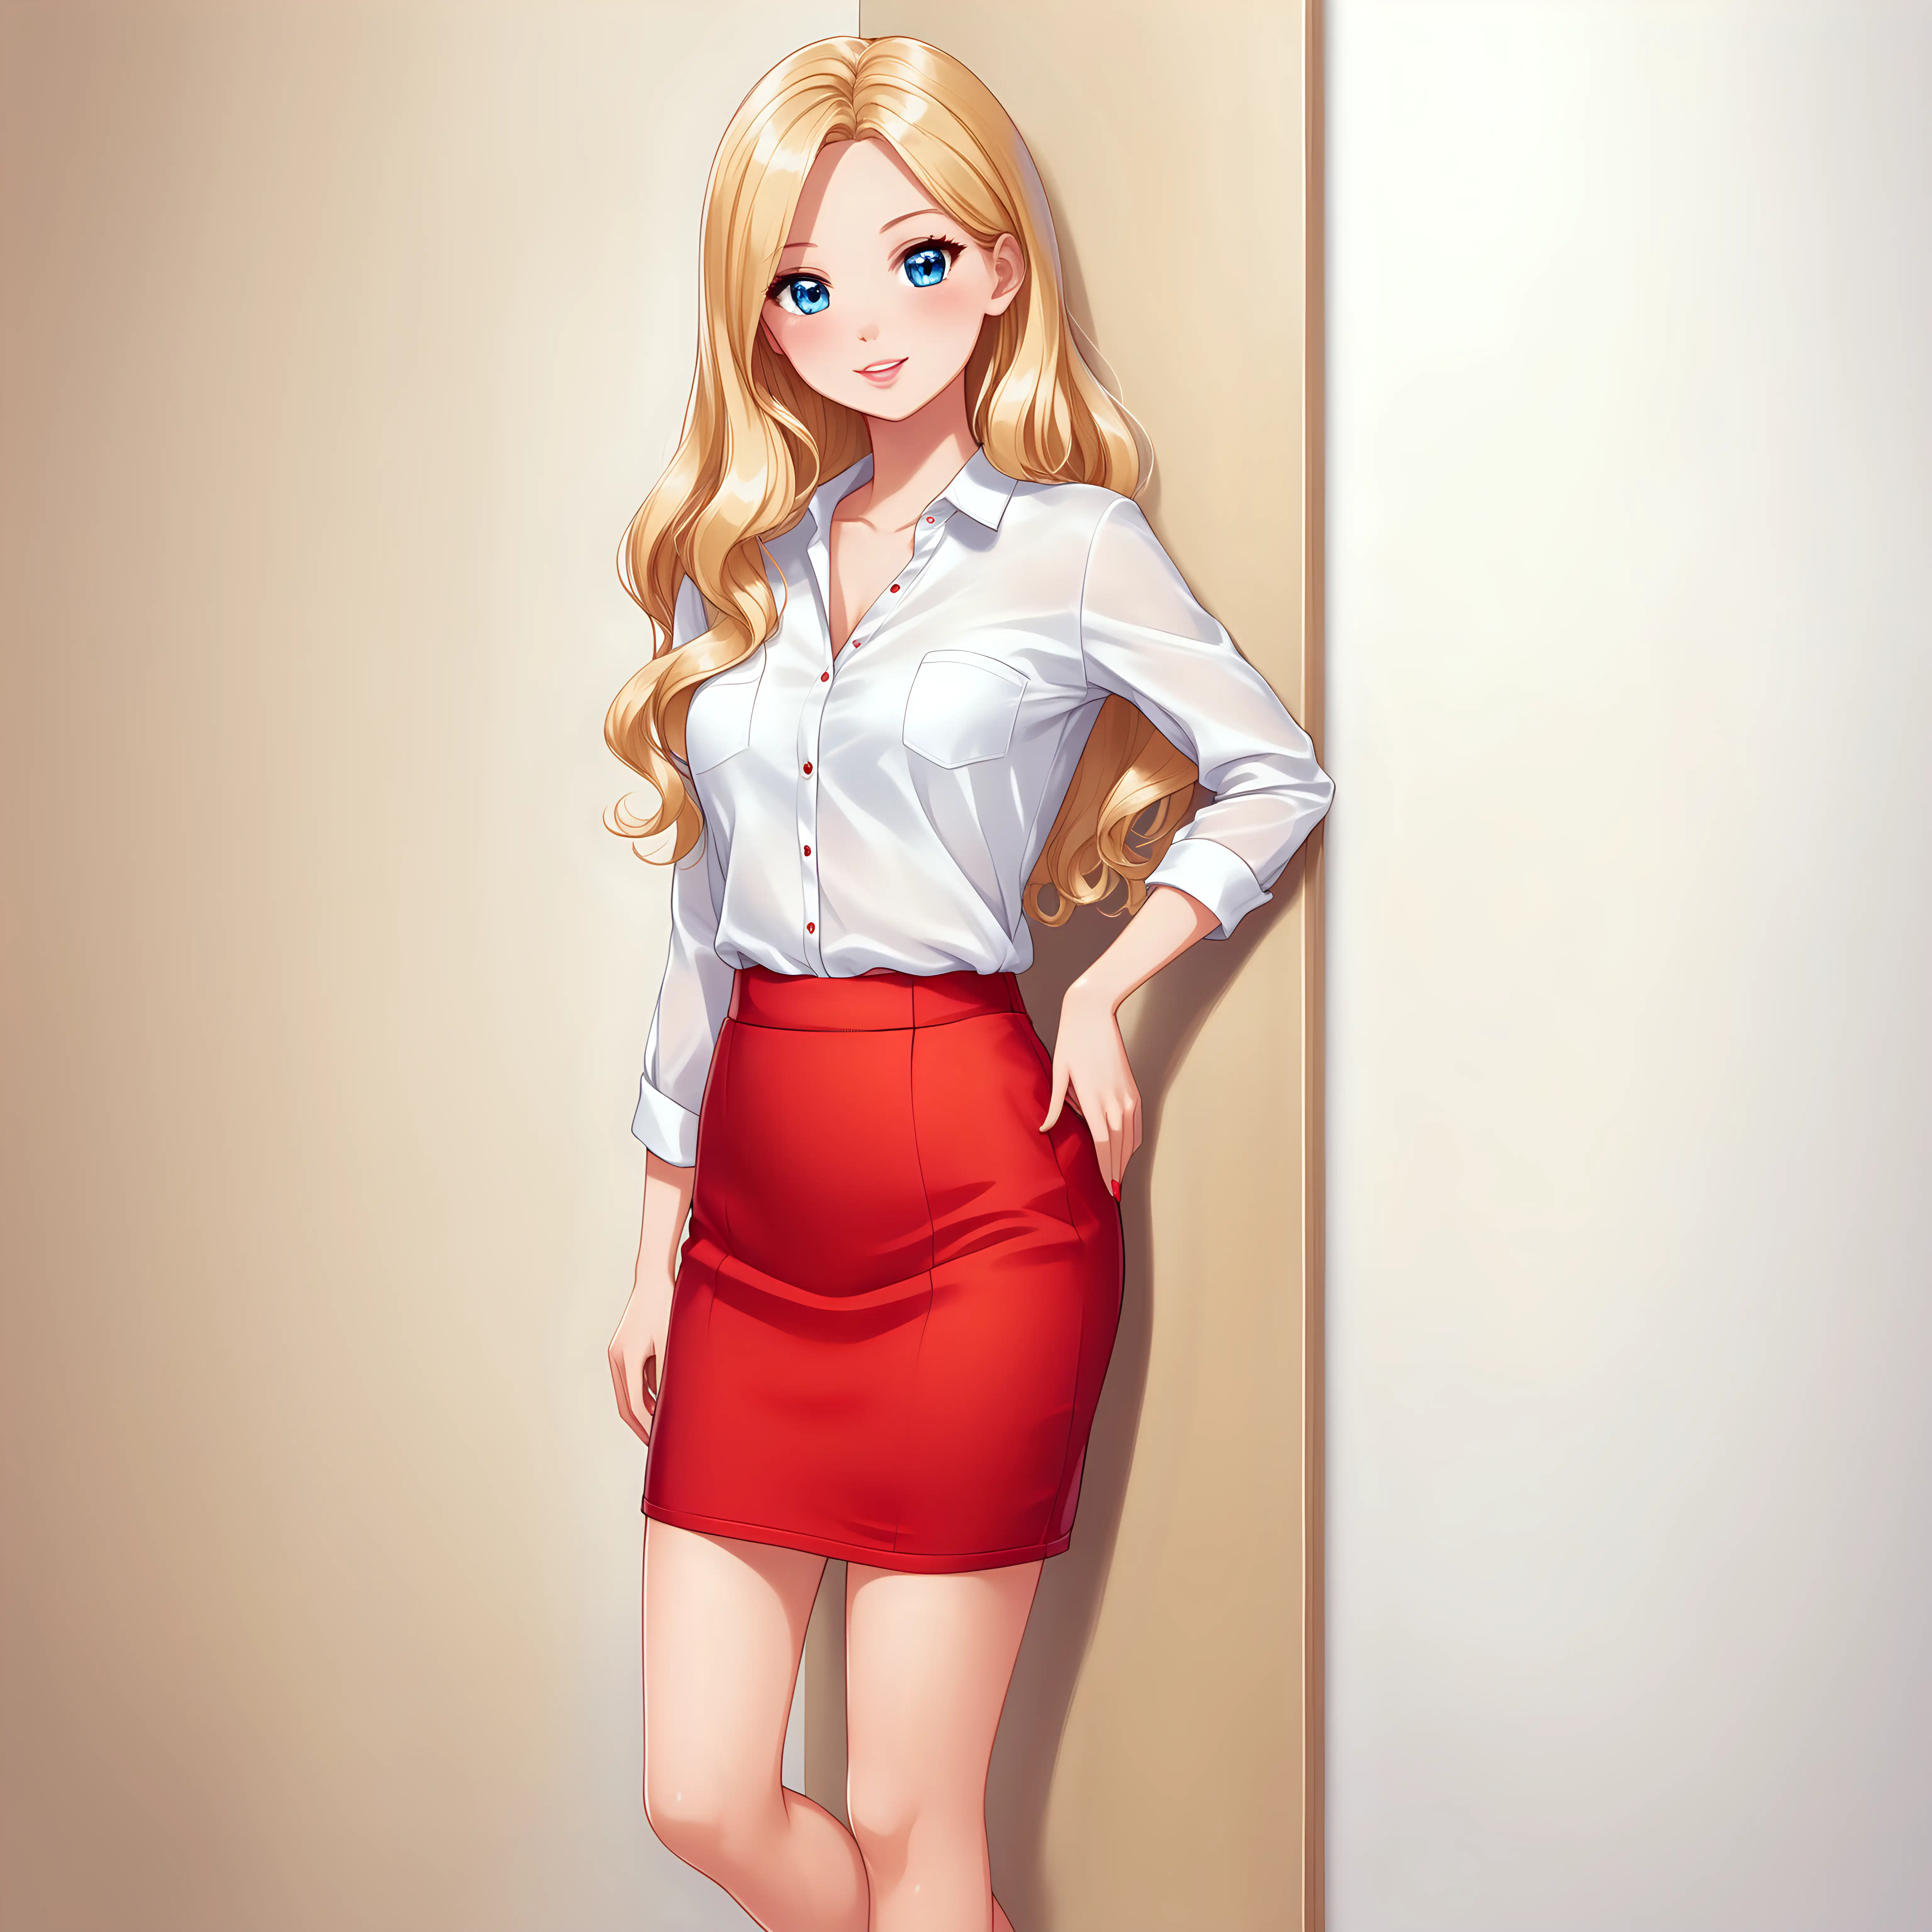 Elegant Blonde Barbie Doll Leaning Against Wall in Silk Shirt and Red Skirt